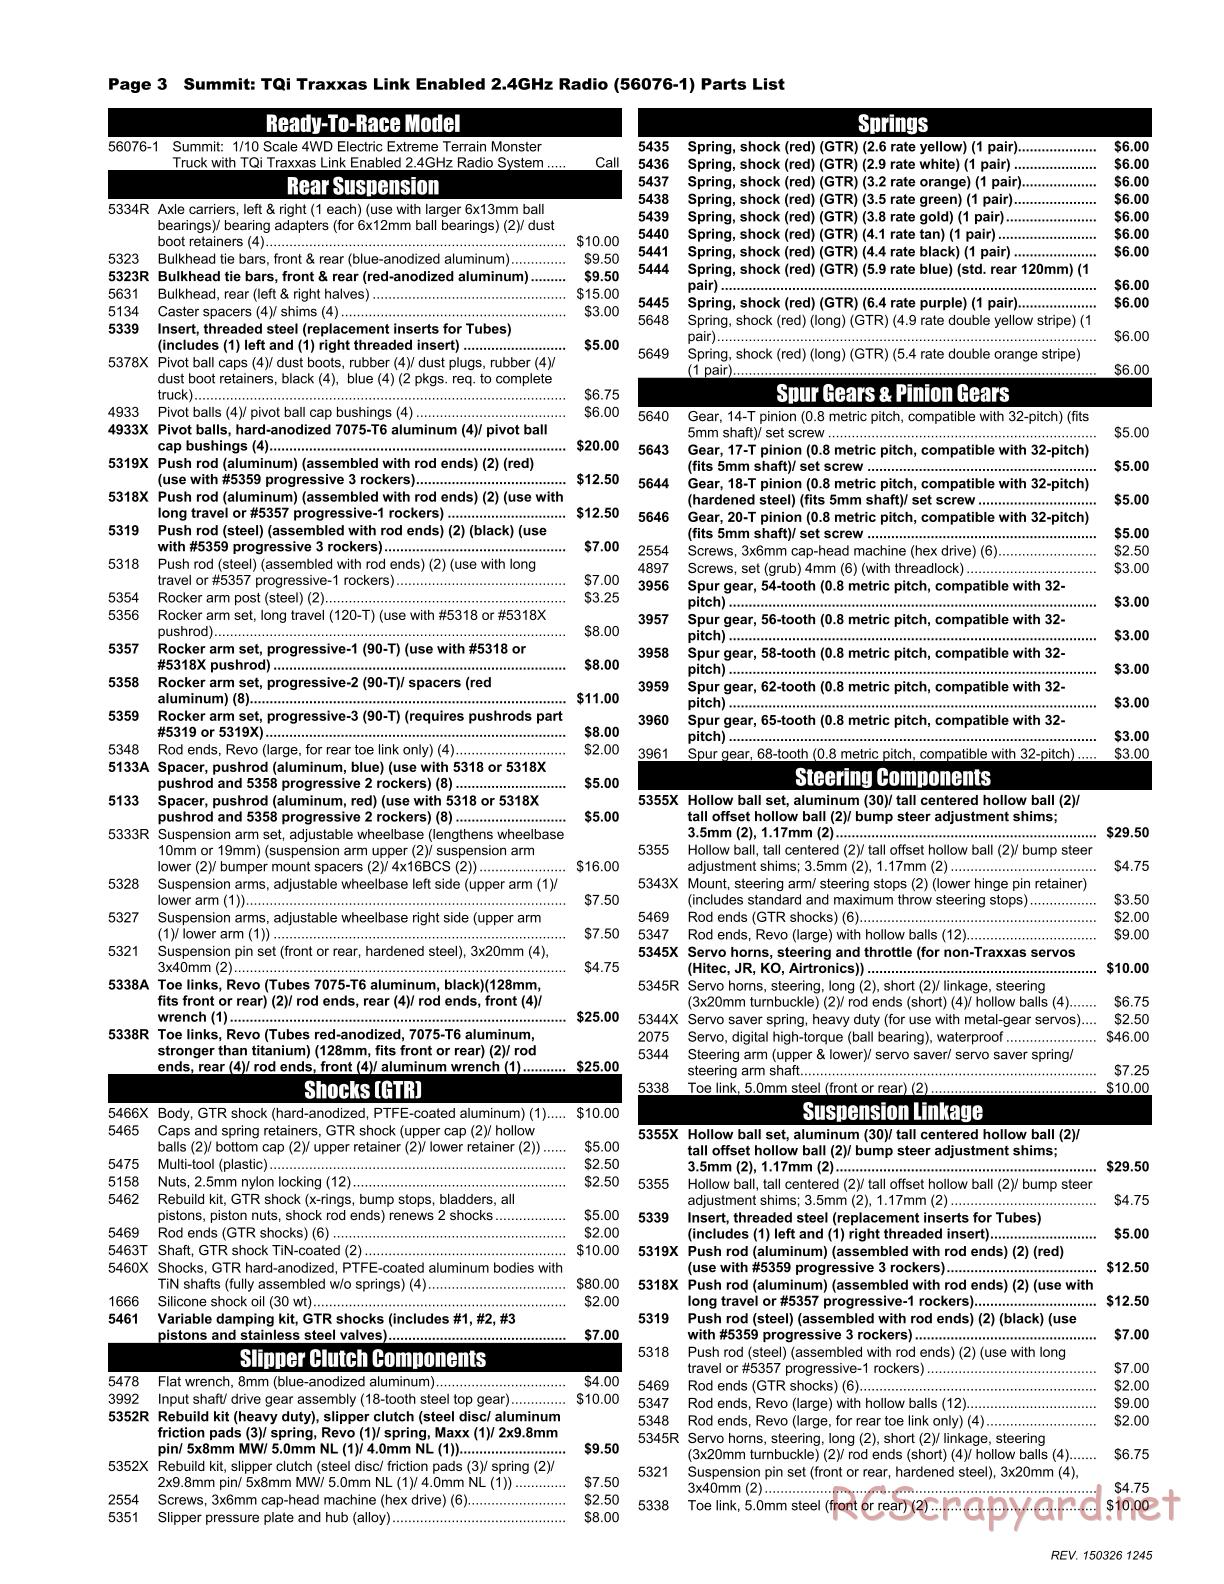 Traxxas - Summit (2015) - Parts List - Page 3